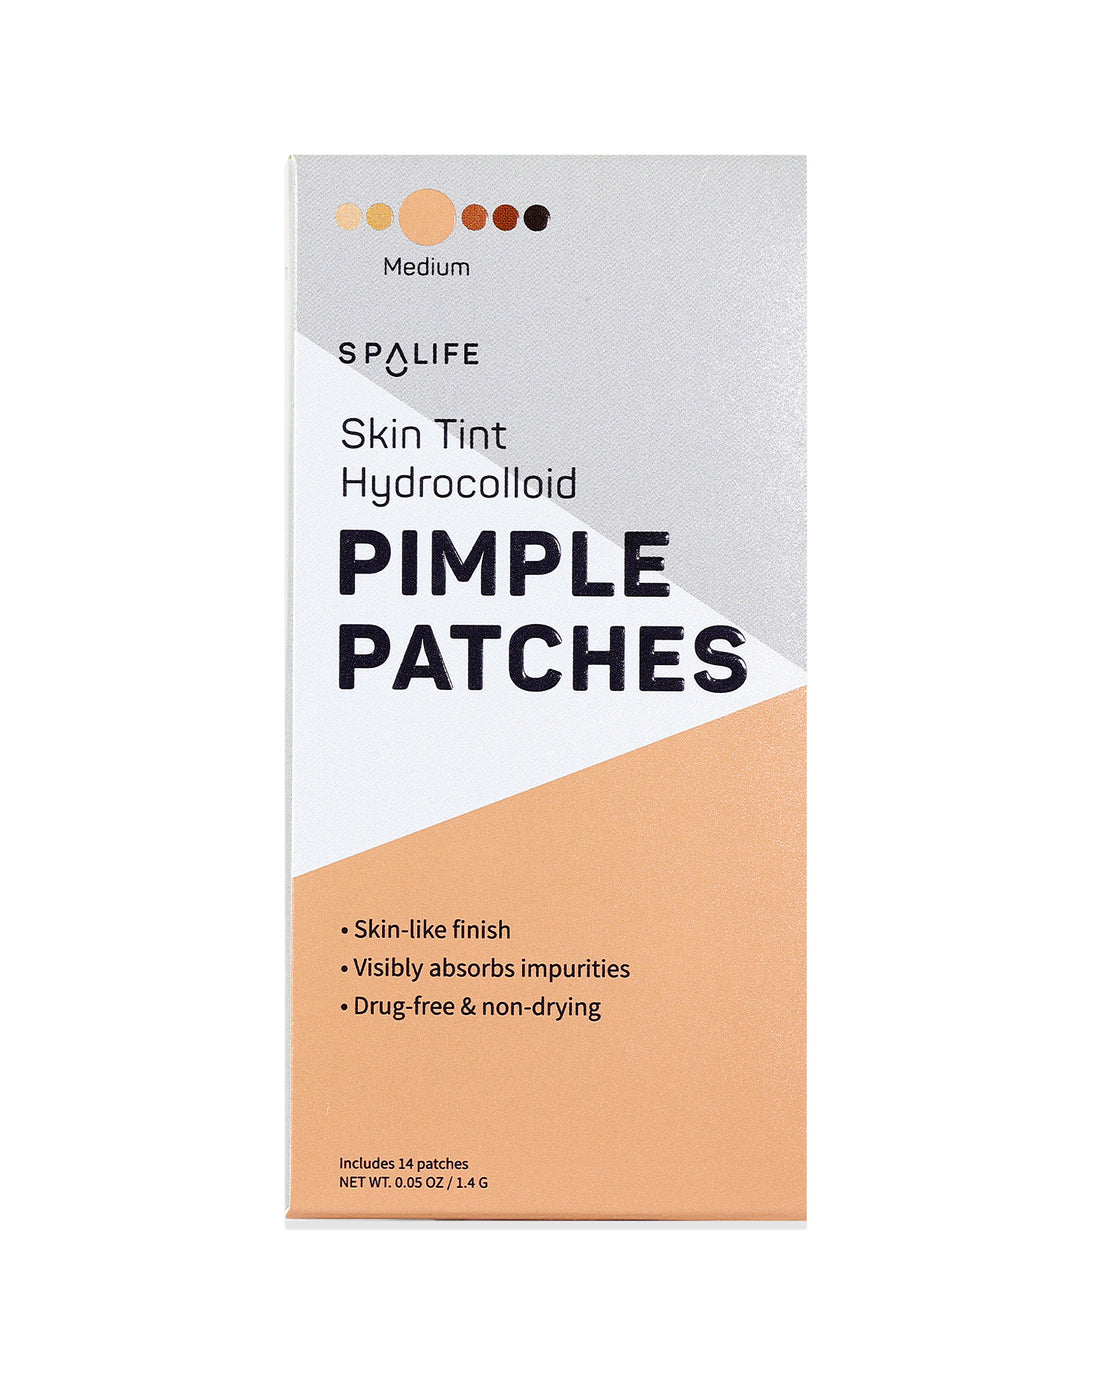 Skin_tint_pimple_patches_packe-895